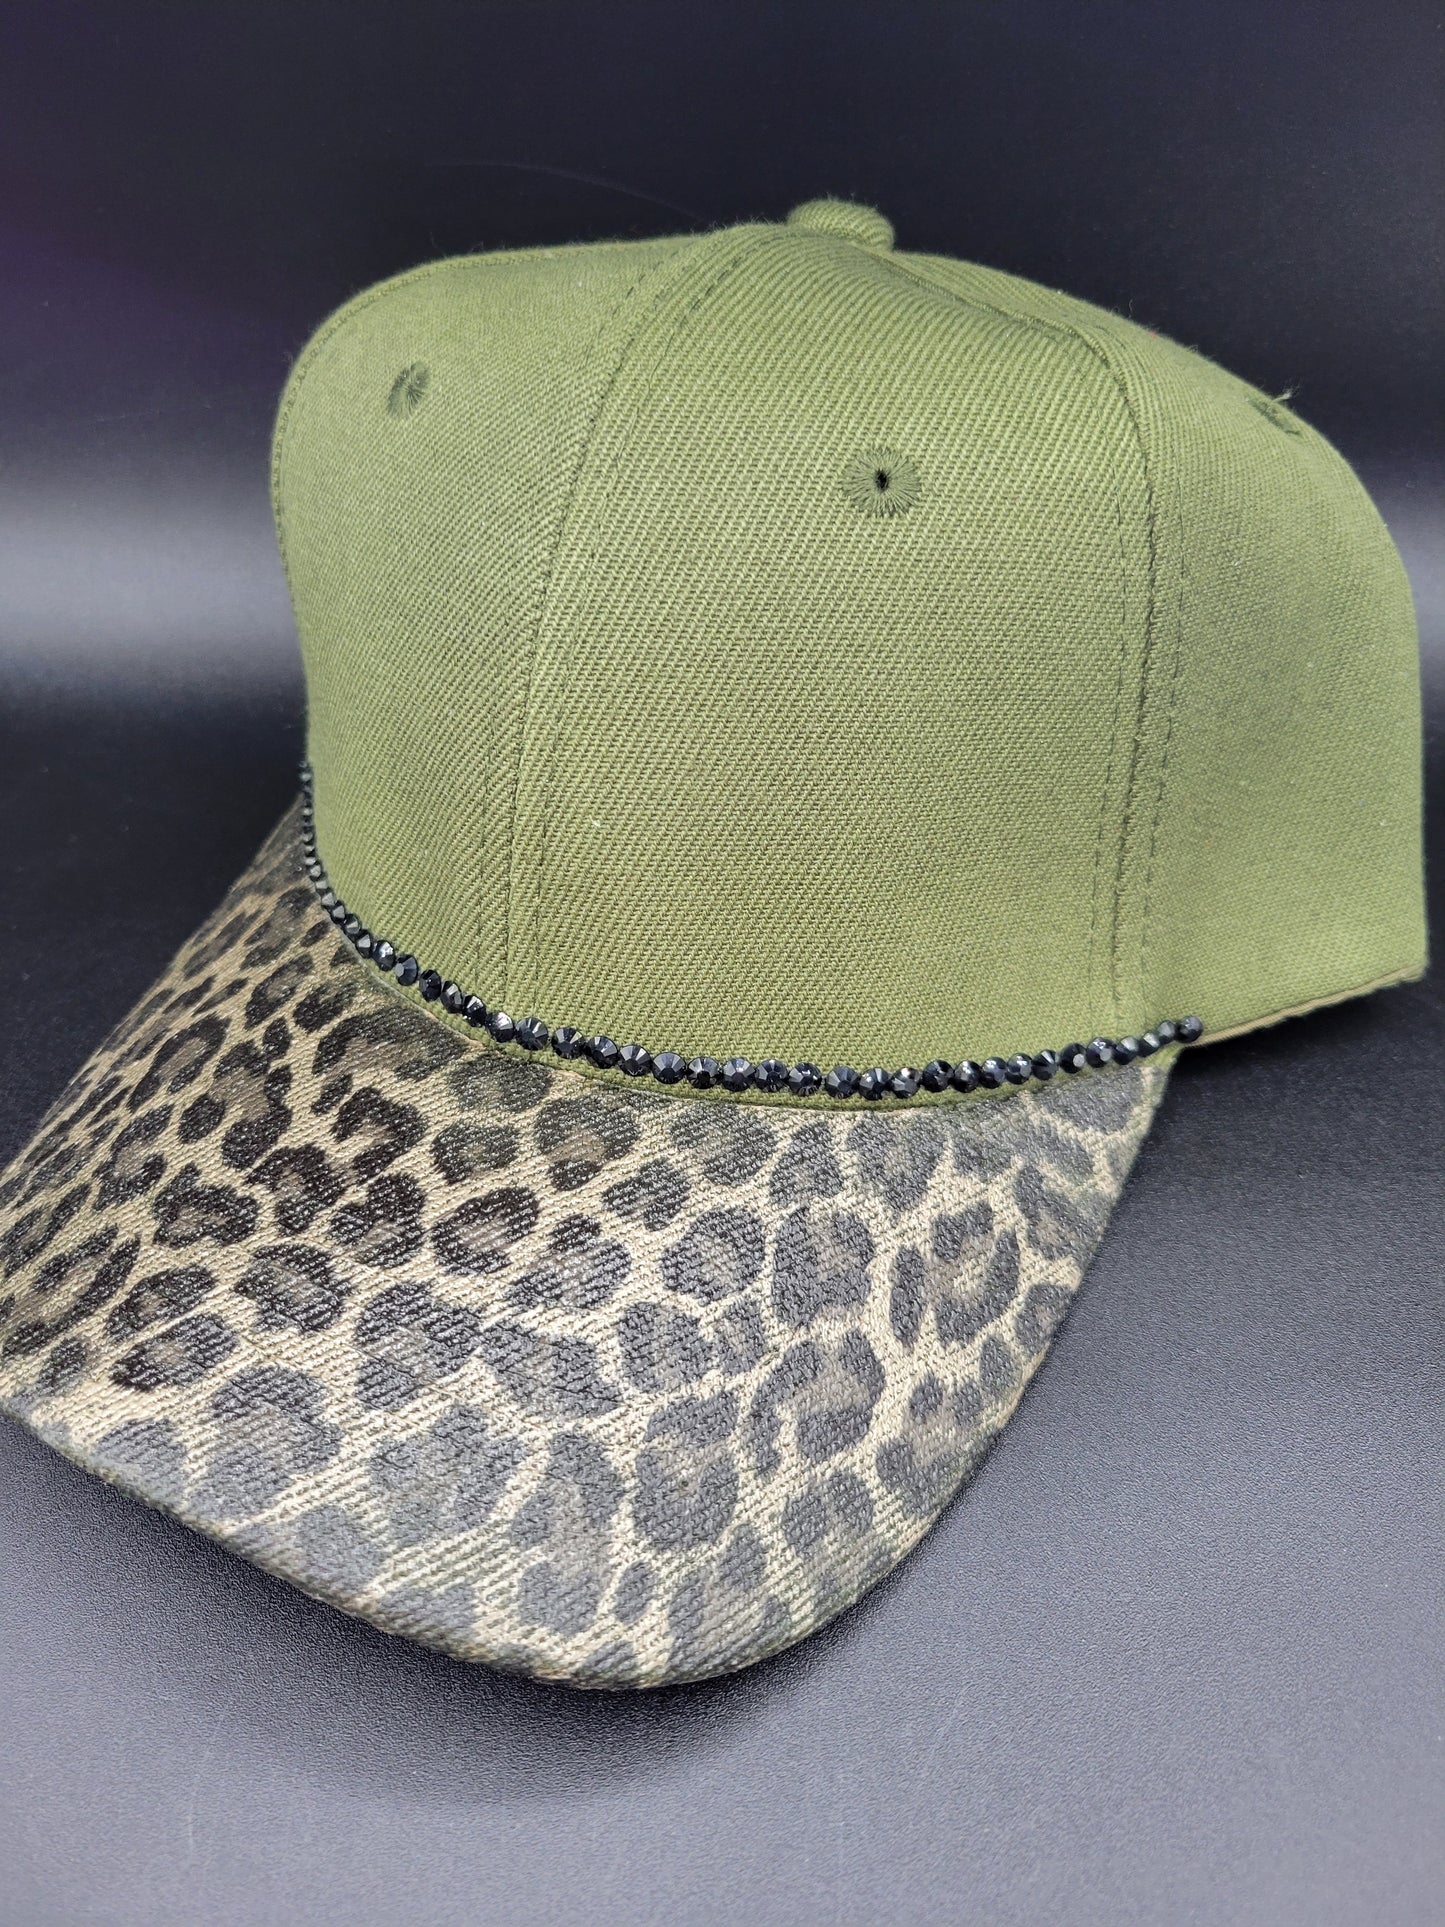 Olive green dad cap with gold leopard foil and black rhinestones